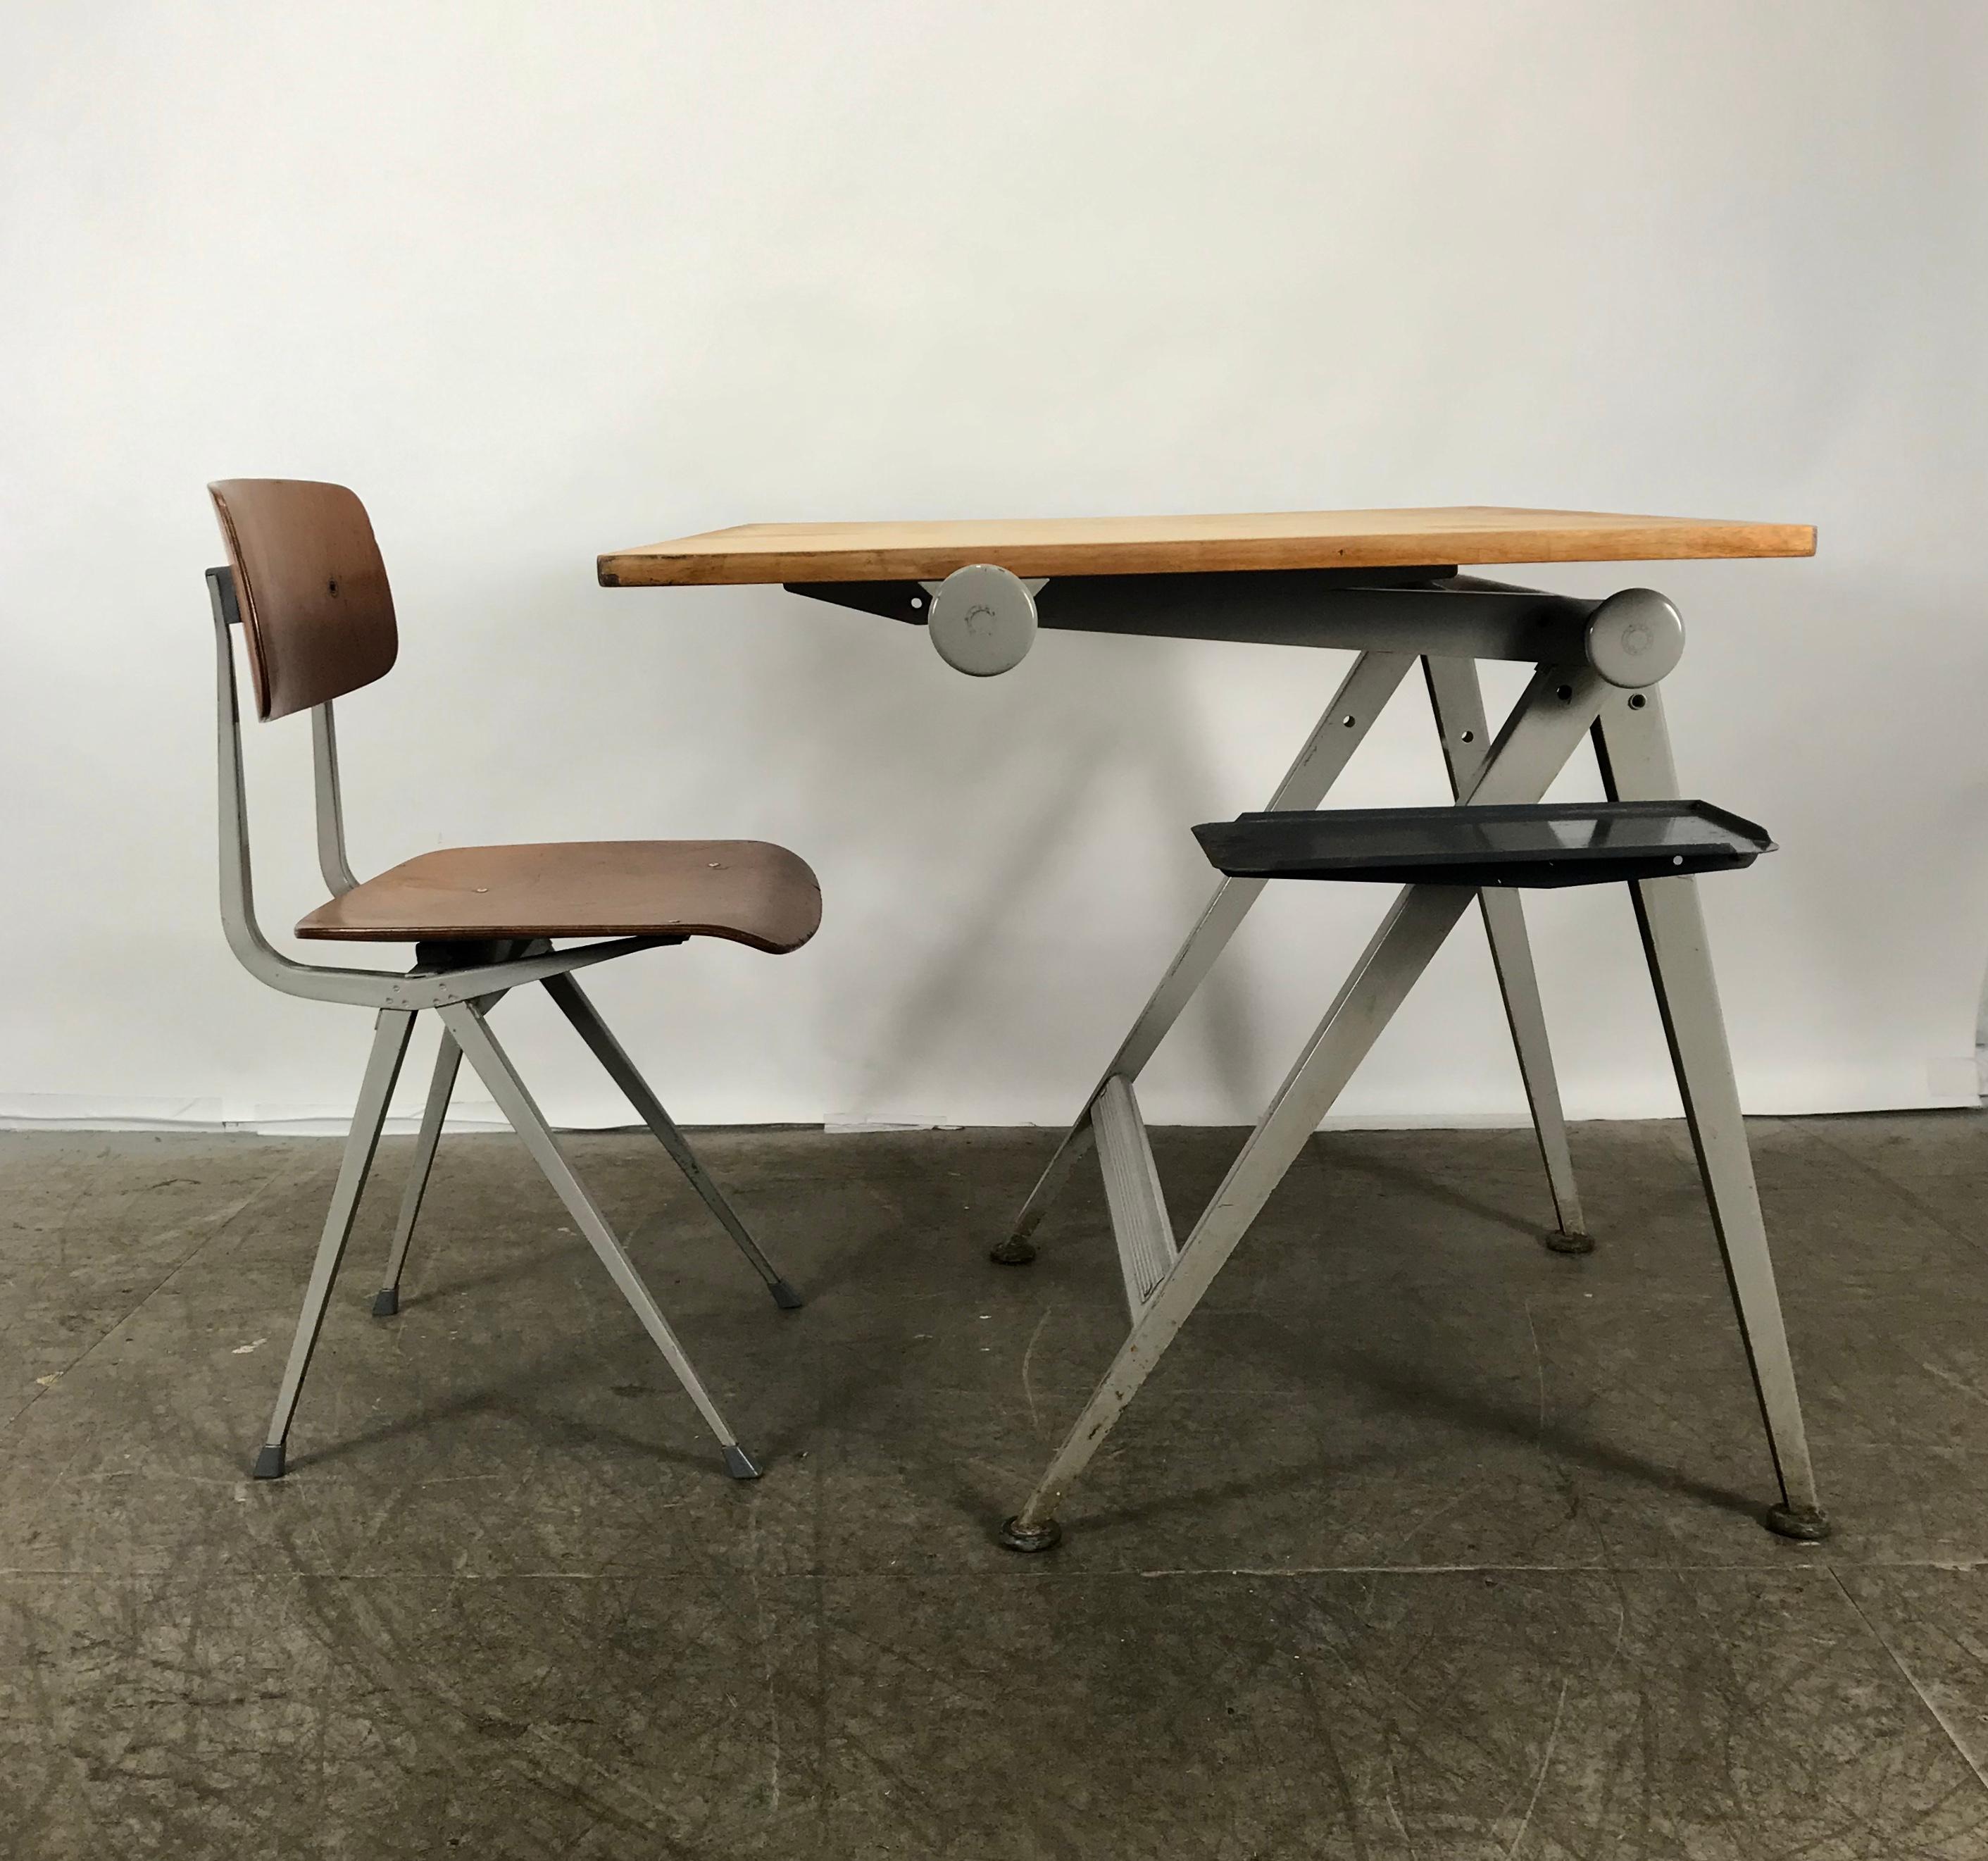 Wim Rietveld & Friso Kramer architectural drafting table and chair, ahrend 1958, Classic design, adjustable height from 29.5